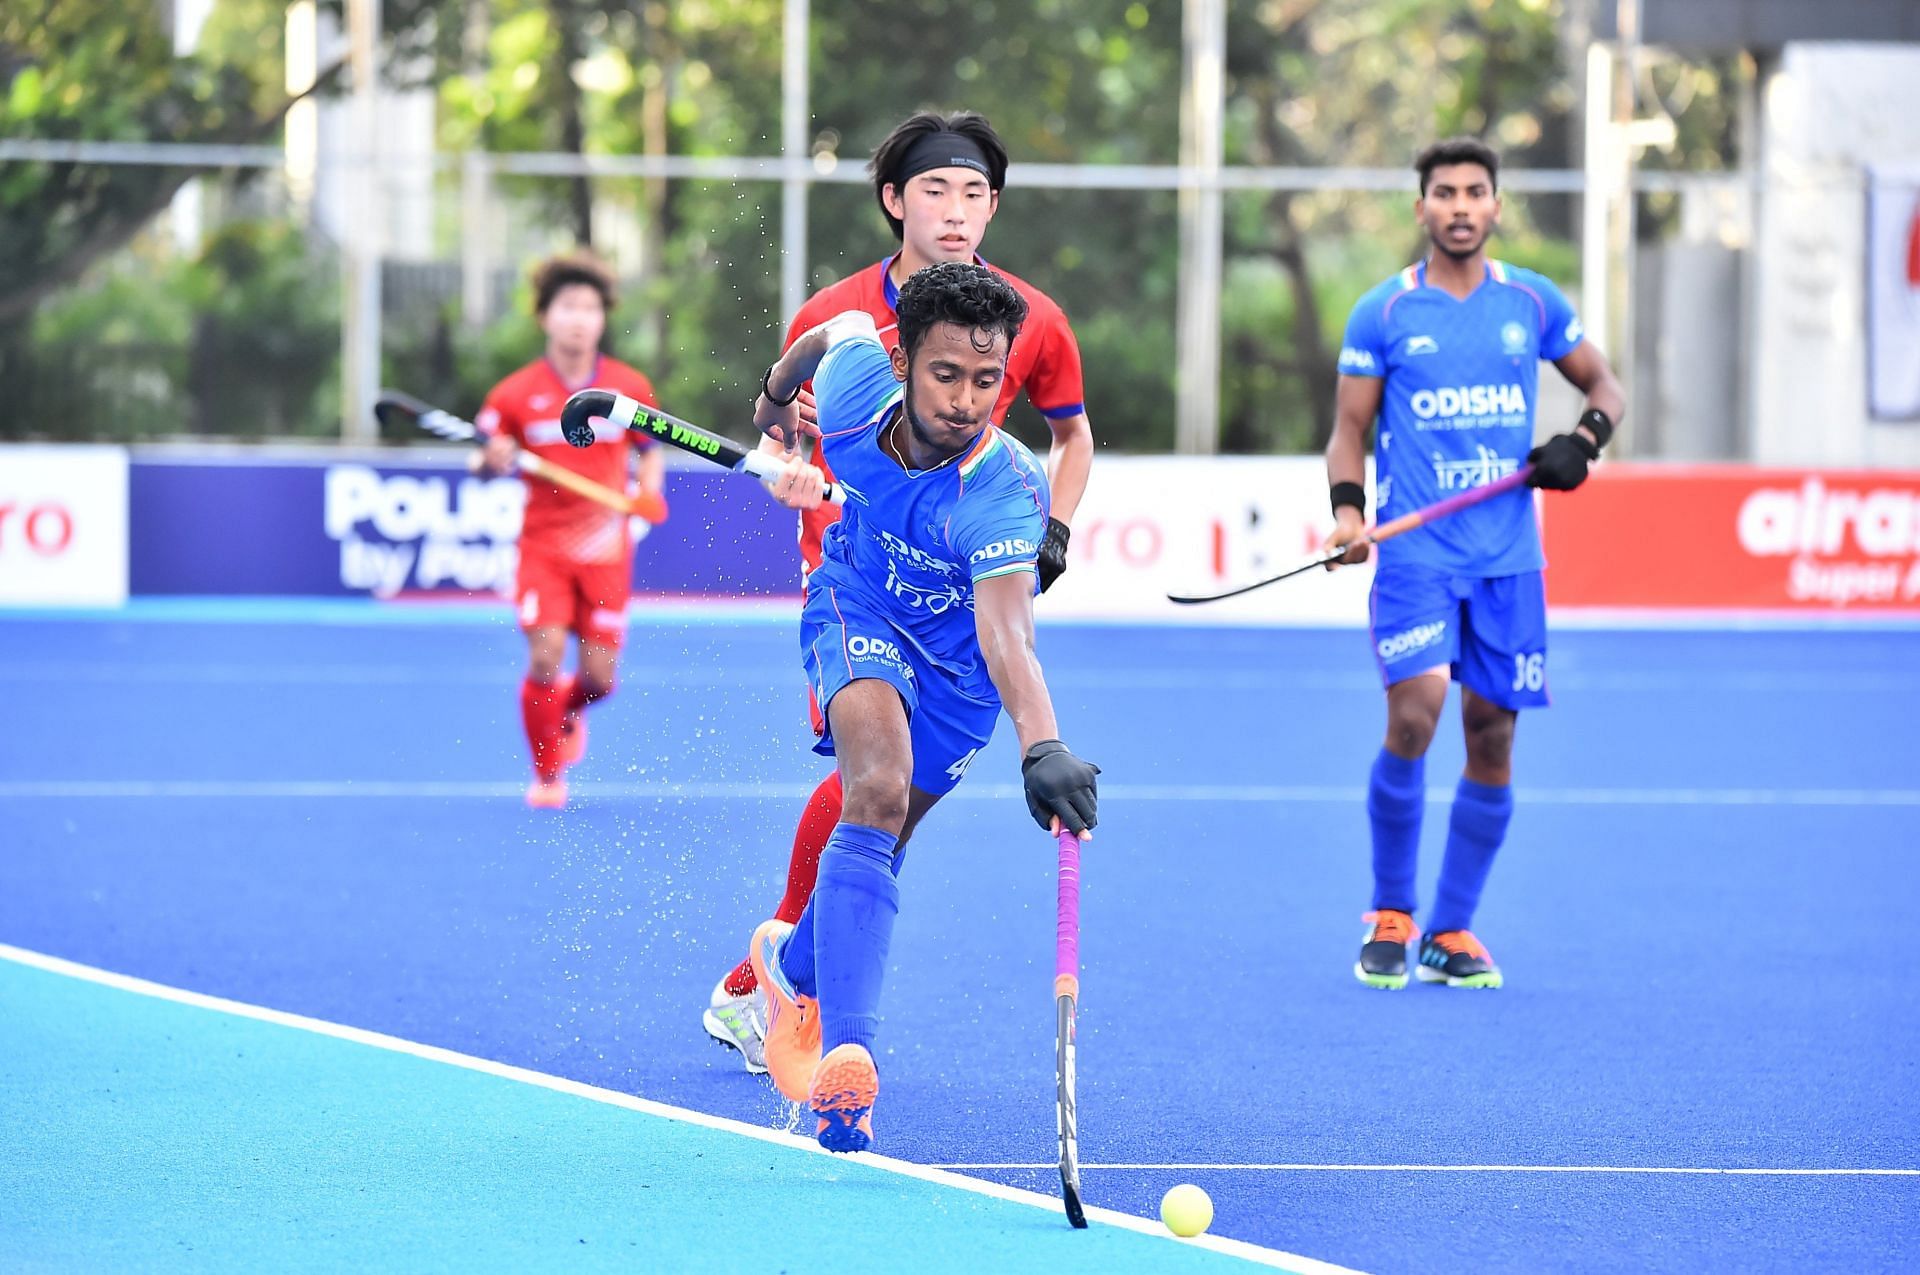 India in action against Japan at the Asia Cup hockey. (Pic: Hockey India Twitter)